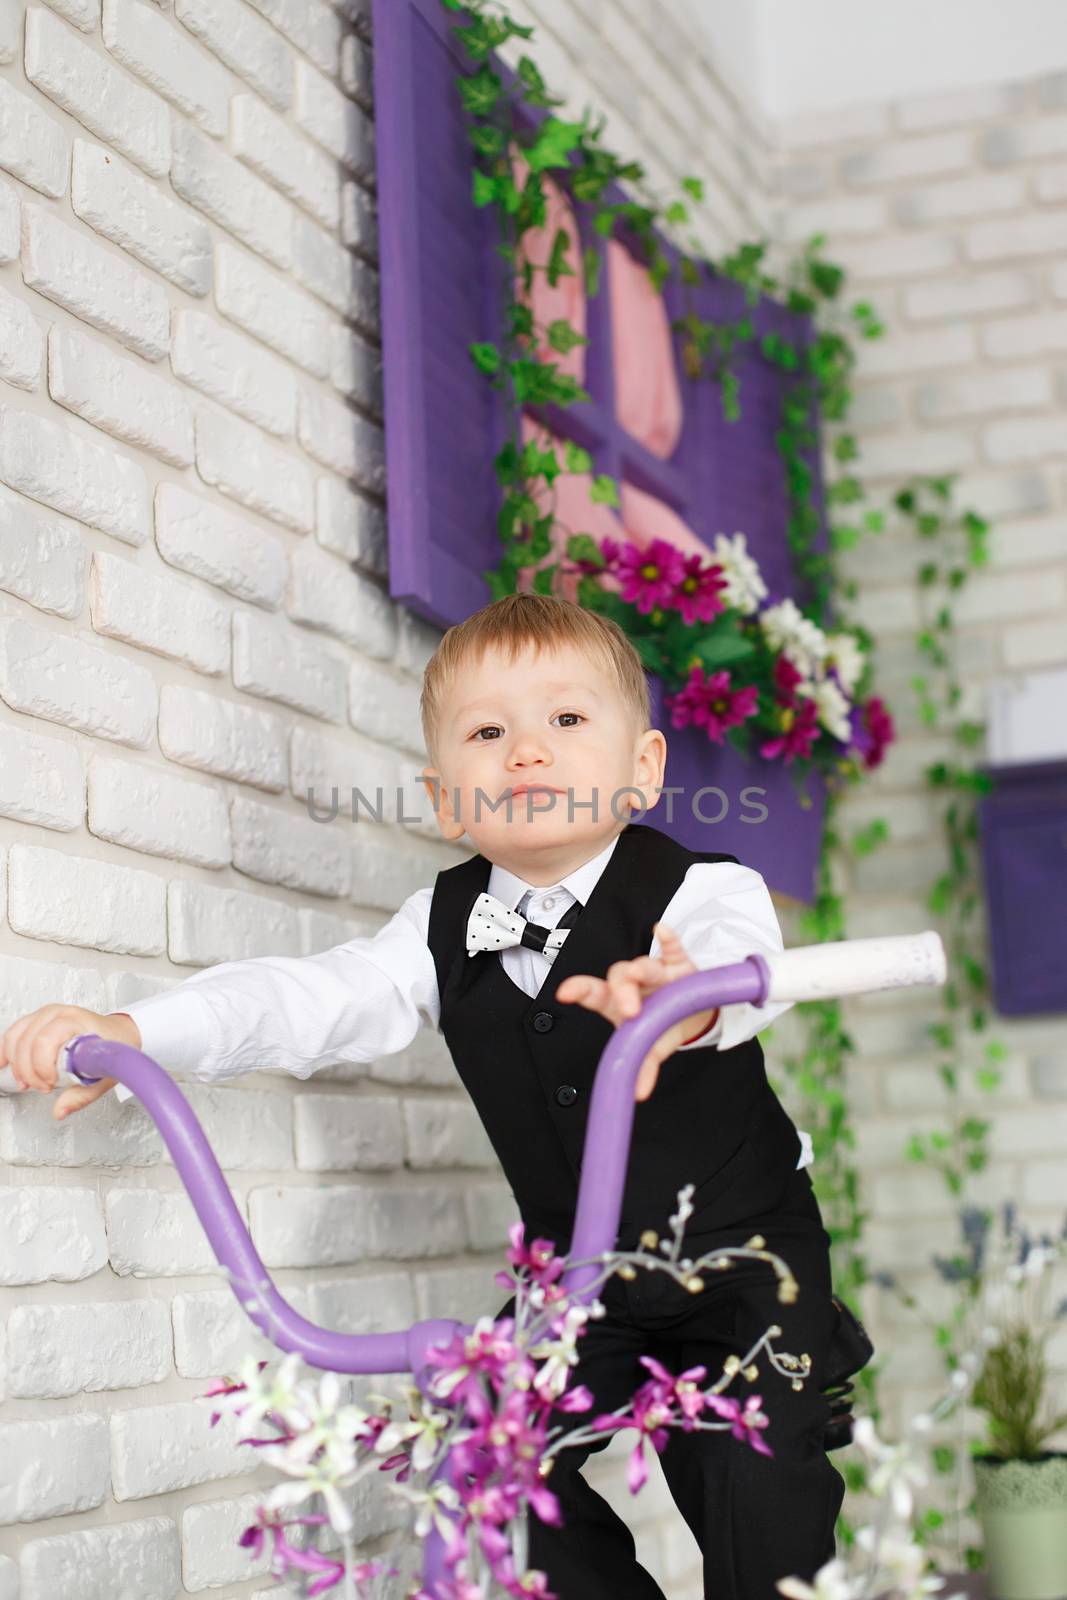 Portrait of an elegant young boy on a bicycle in studio decorate by natazhekova